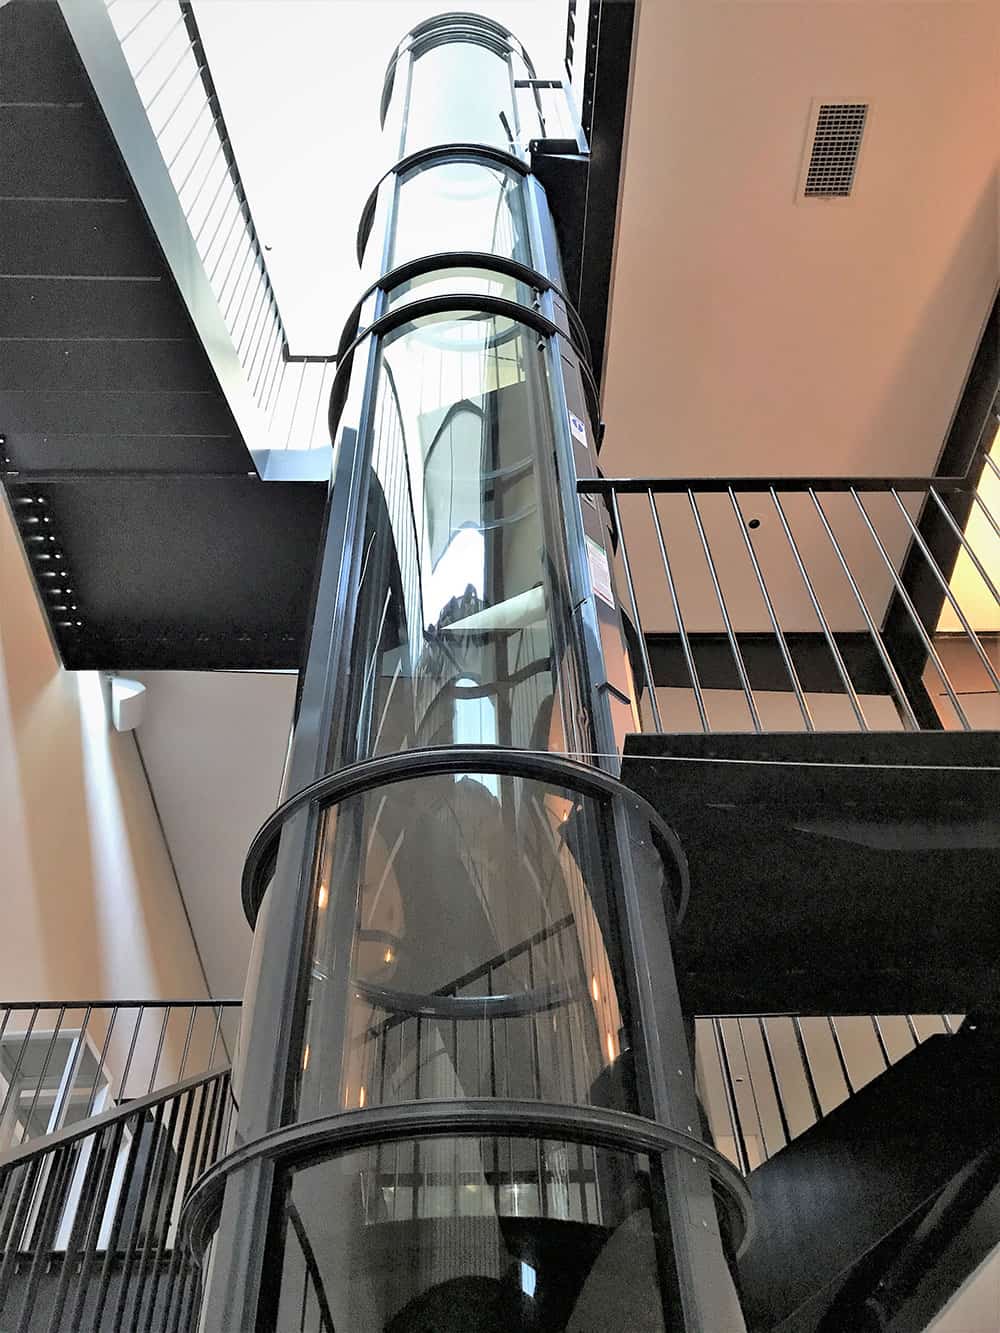 3-story residential elevator installed in the stairwell of a westlake residence